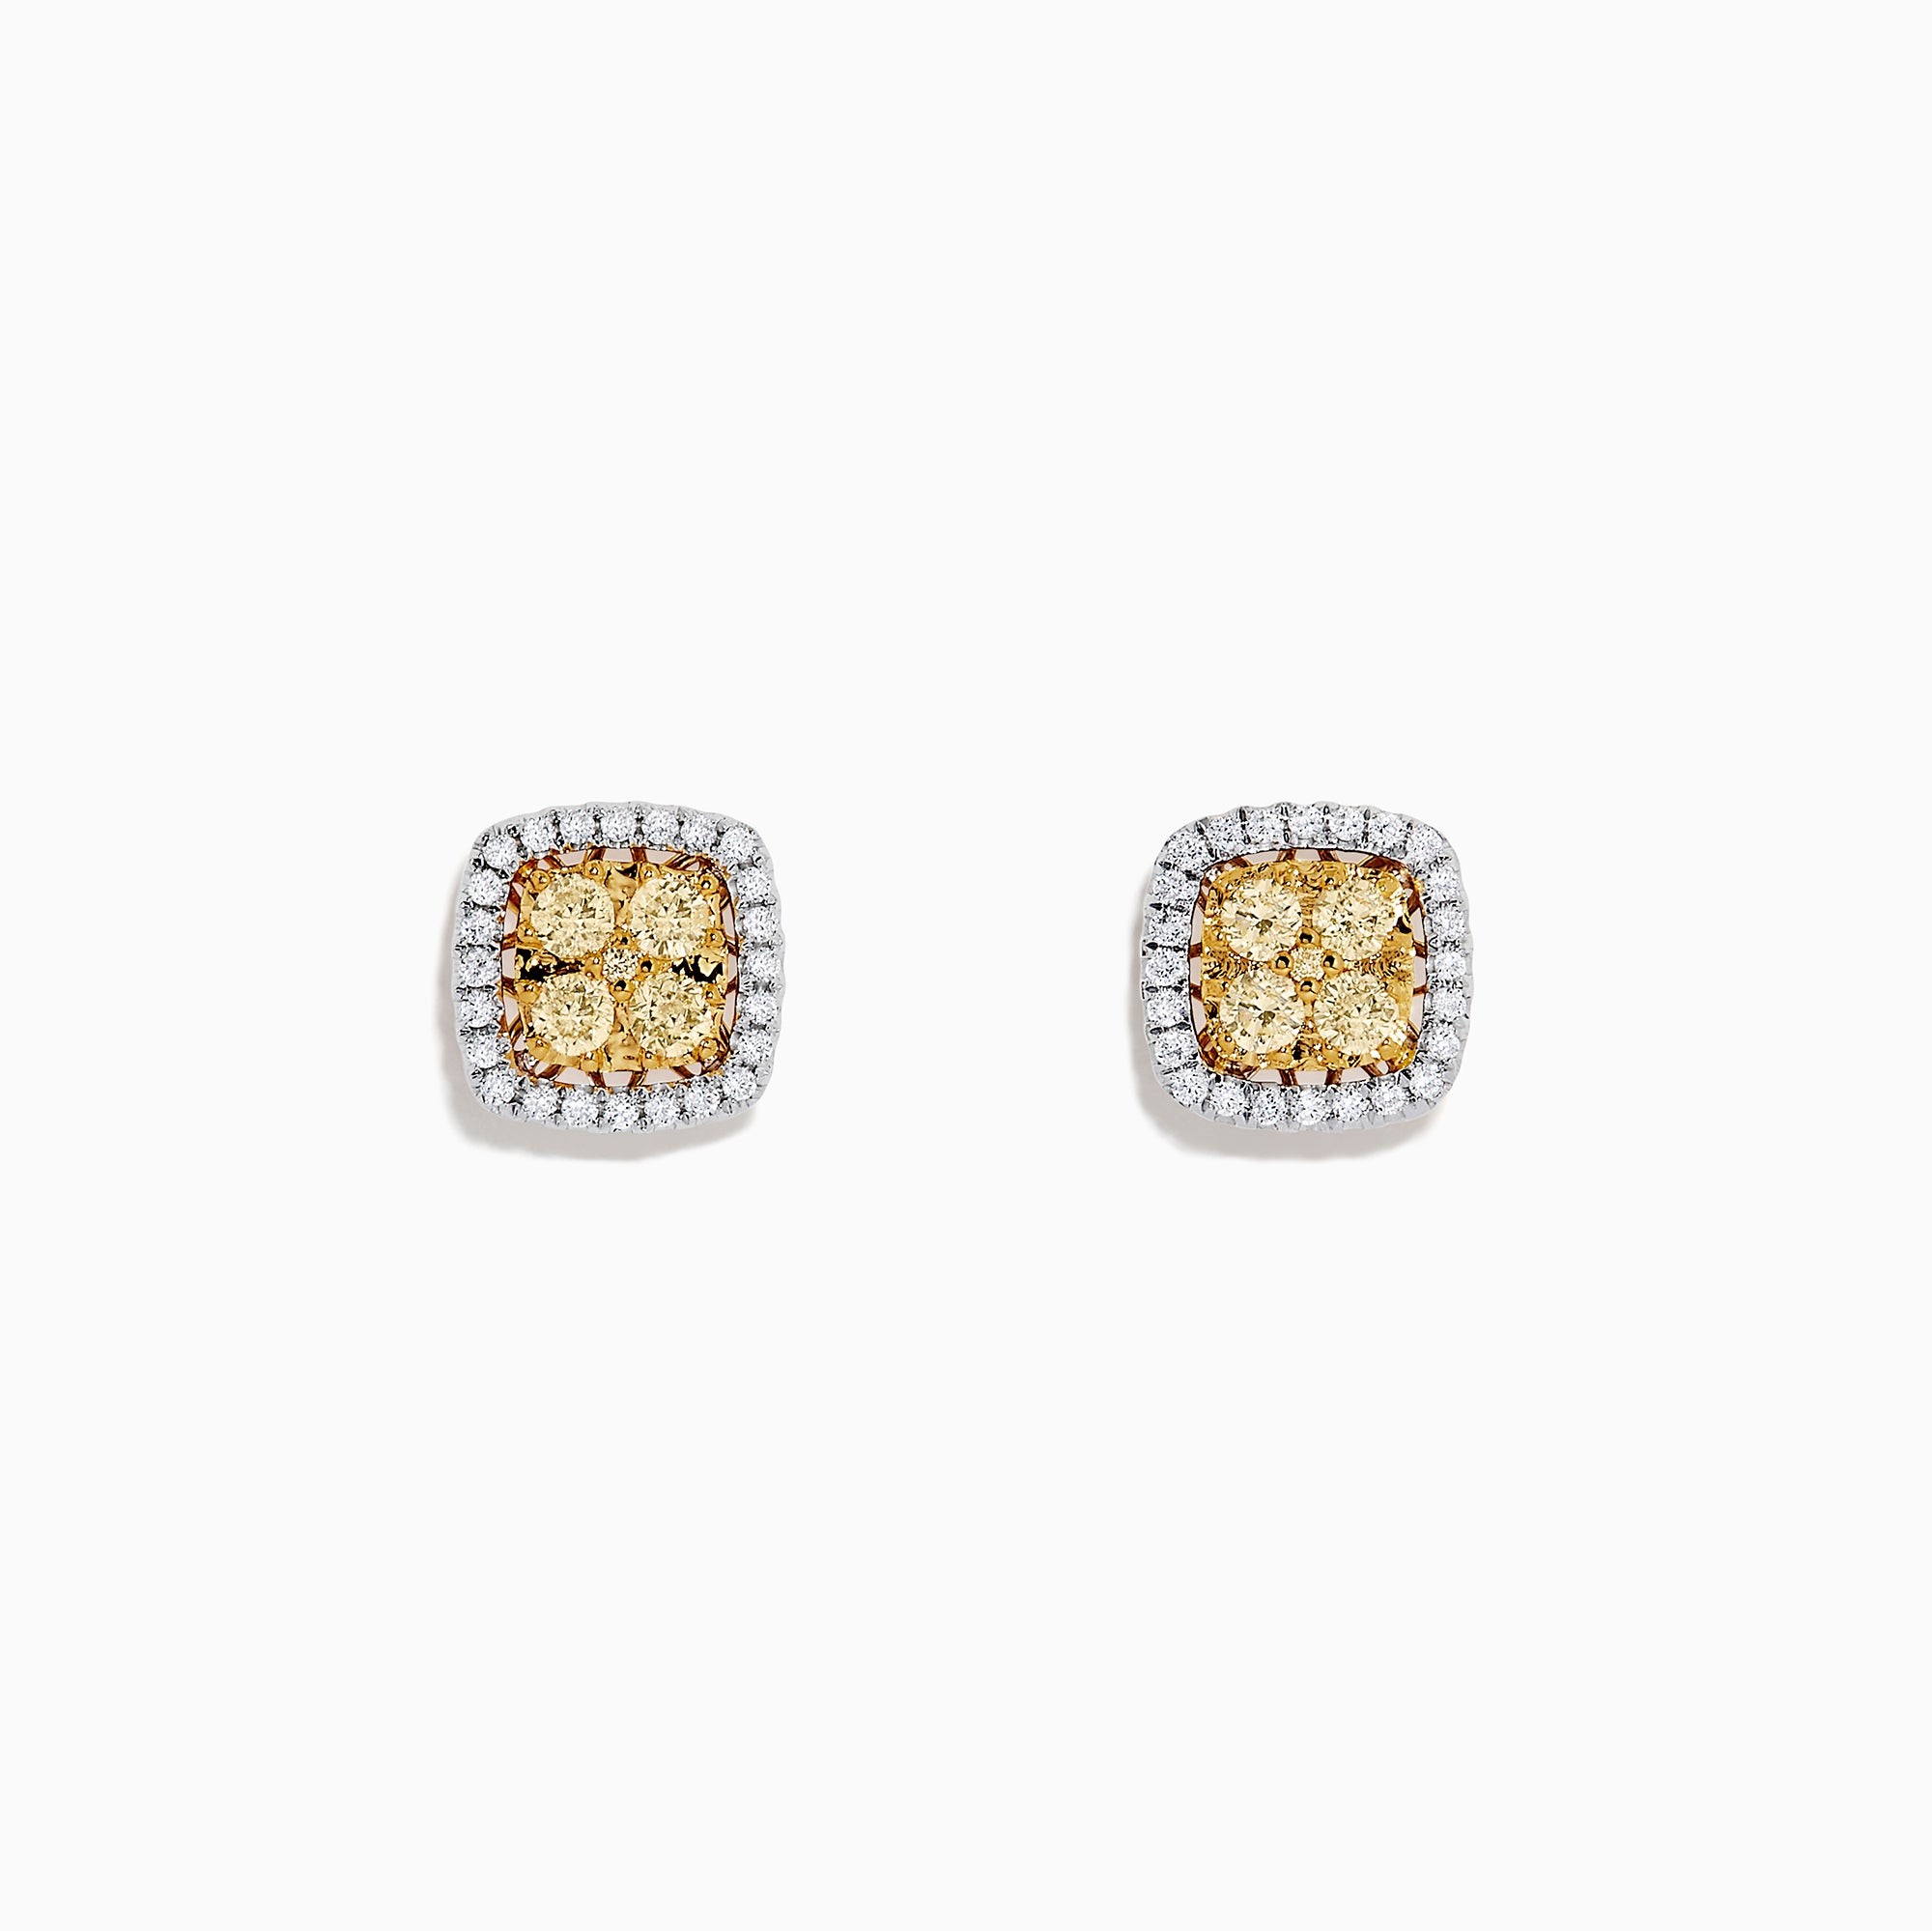 Effy Canare 18K Two Tone Gold Yellow and White Diamond Earrings, 0.54 TCW